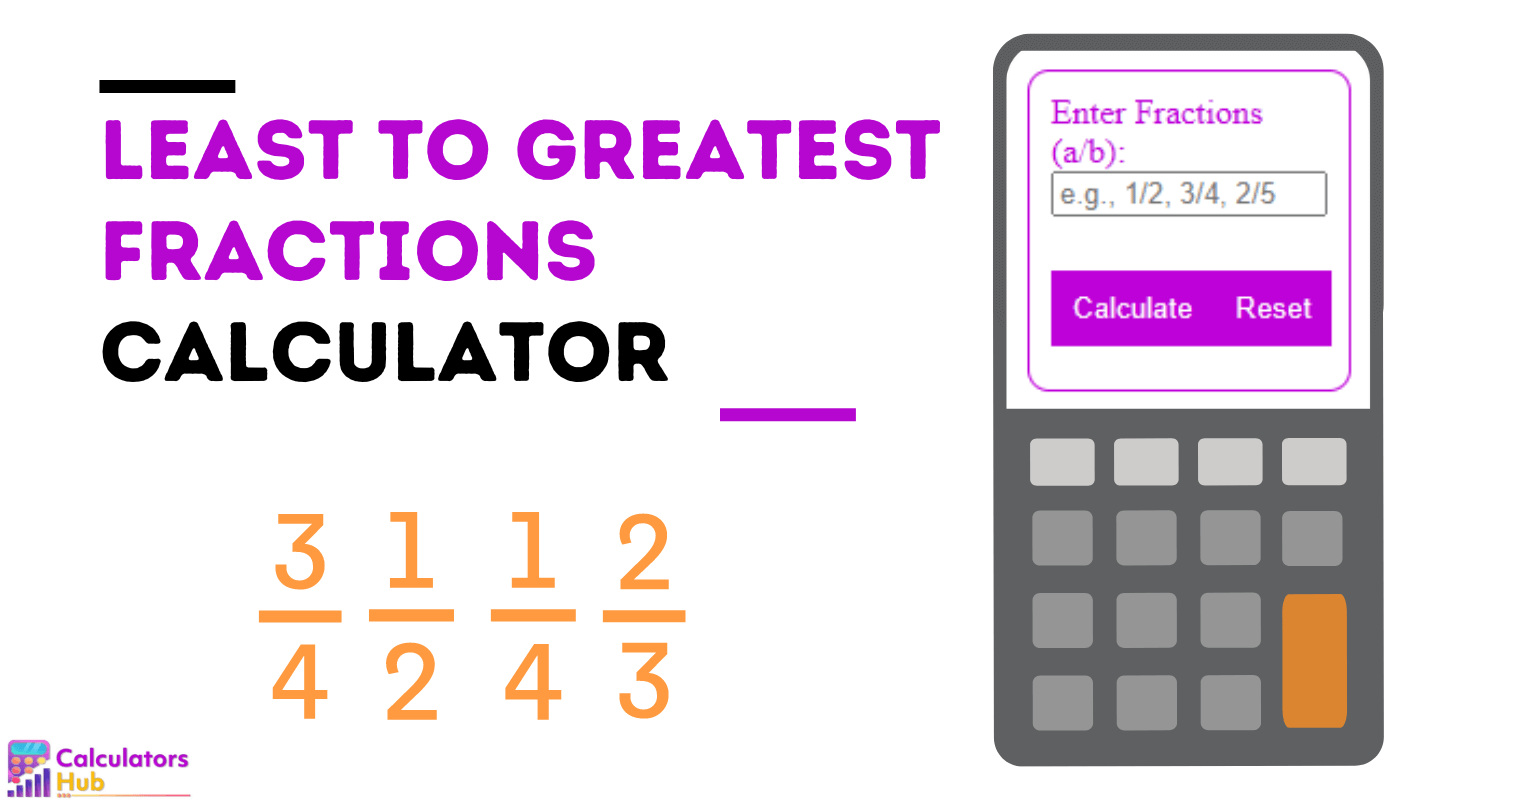 Least to Greatest Fractions Calculator